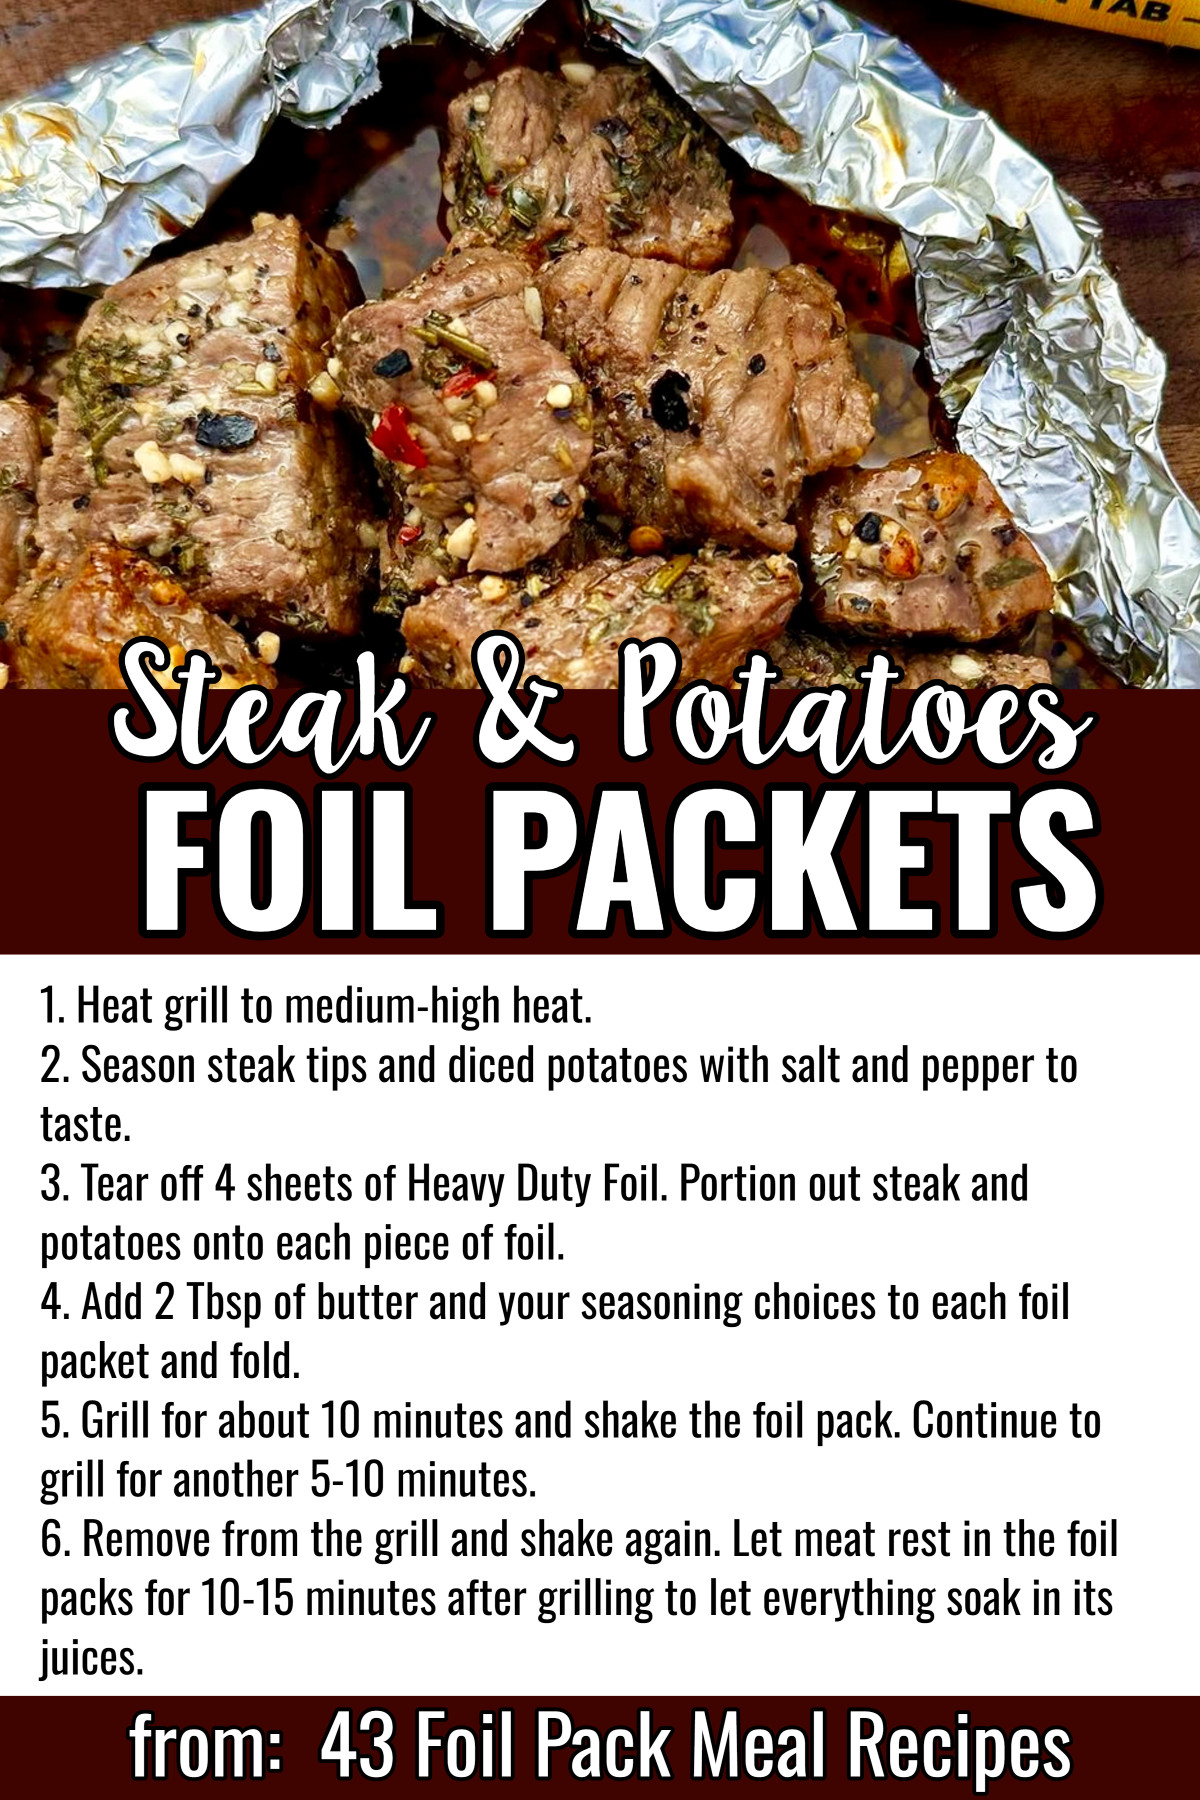 Steak Bites and Potatoes Foil Packets